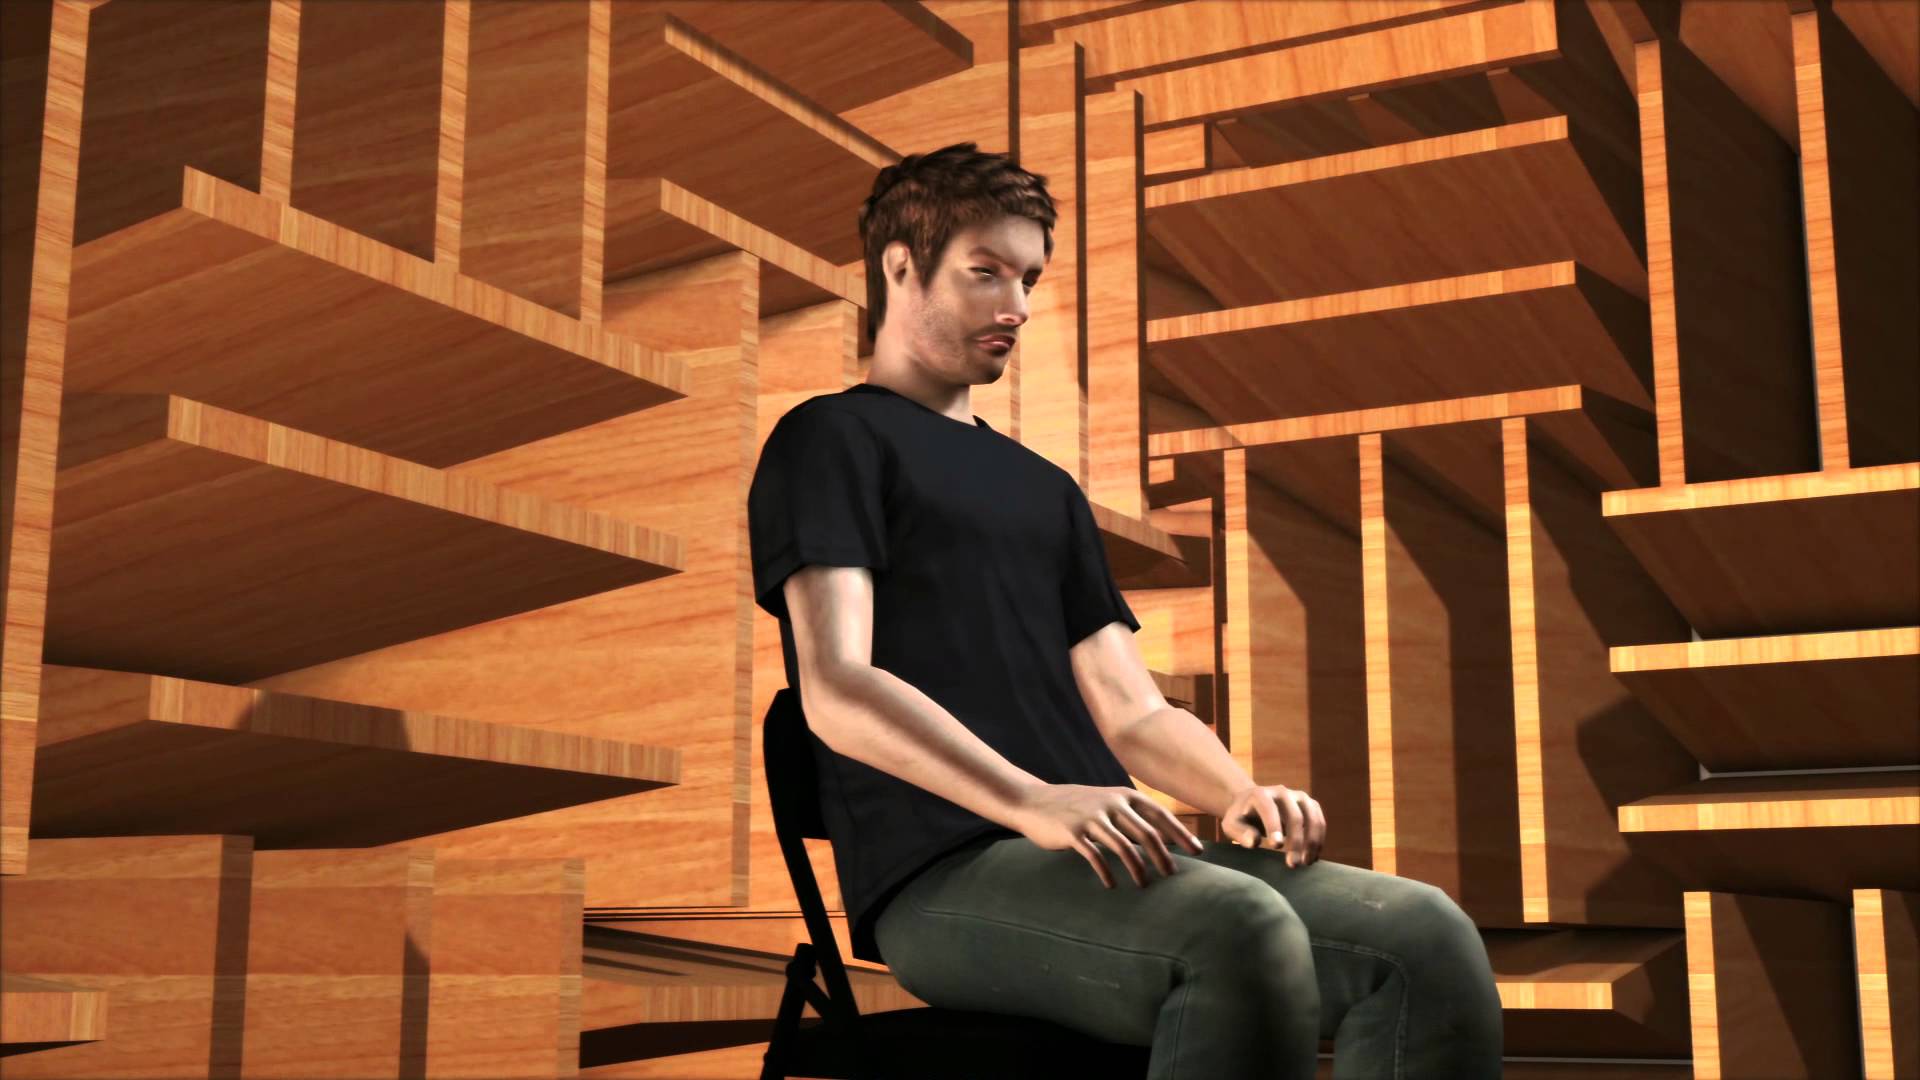 Anechoic Chamber Can Absolute Silence Make Someone Go